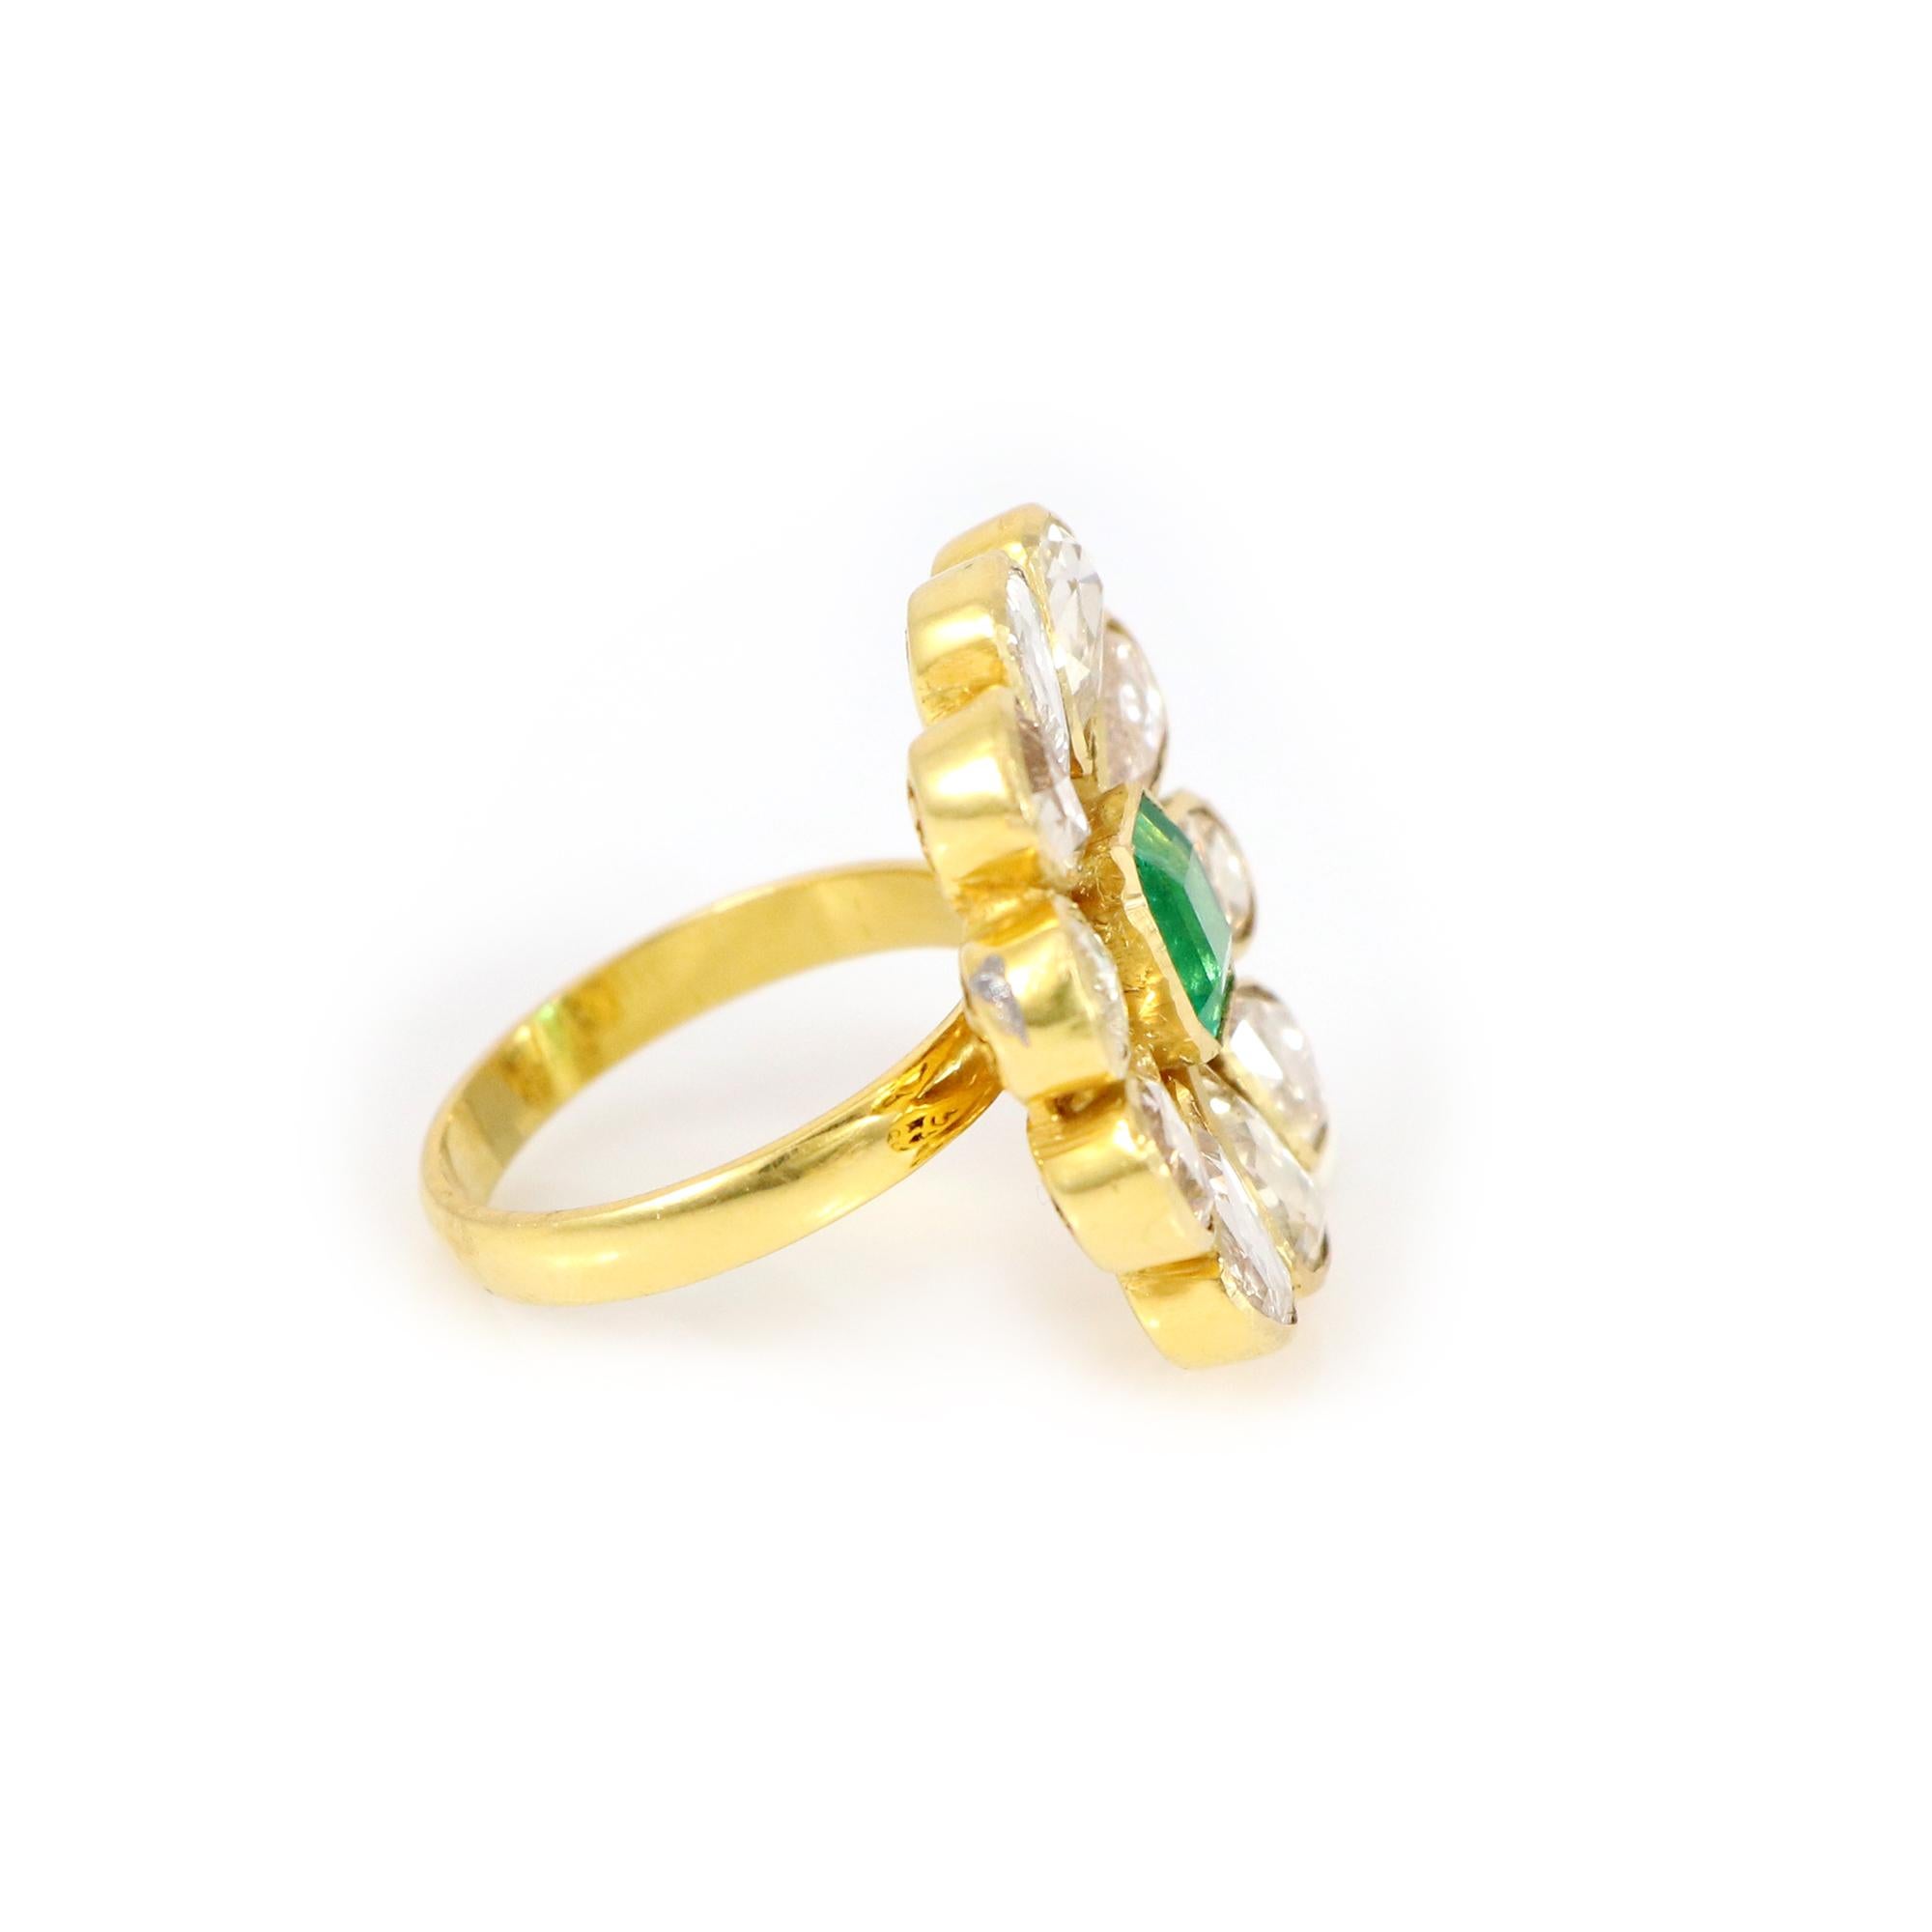 Explore our exquisite 18K yellow gold flower-shaped ring, adorned with a radiant emerald symbolizing love and harmony. Delicate hand-selected rose-cut diamonds encircle the Zambian emerald, adding brilliance and elegance. This timeless piece is more